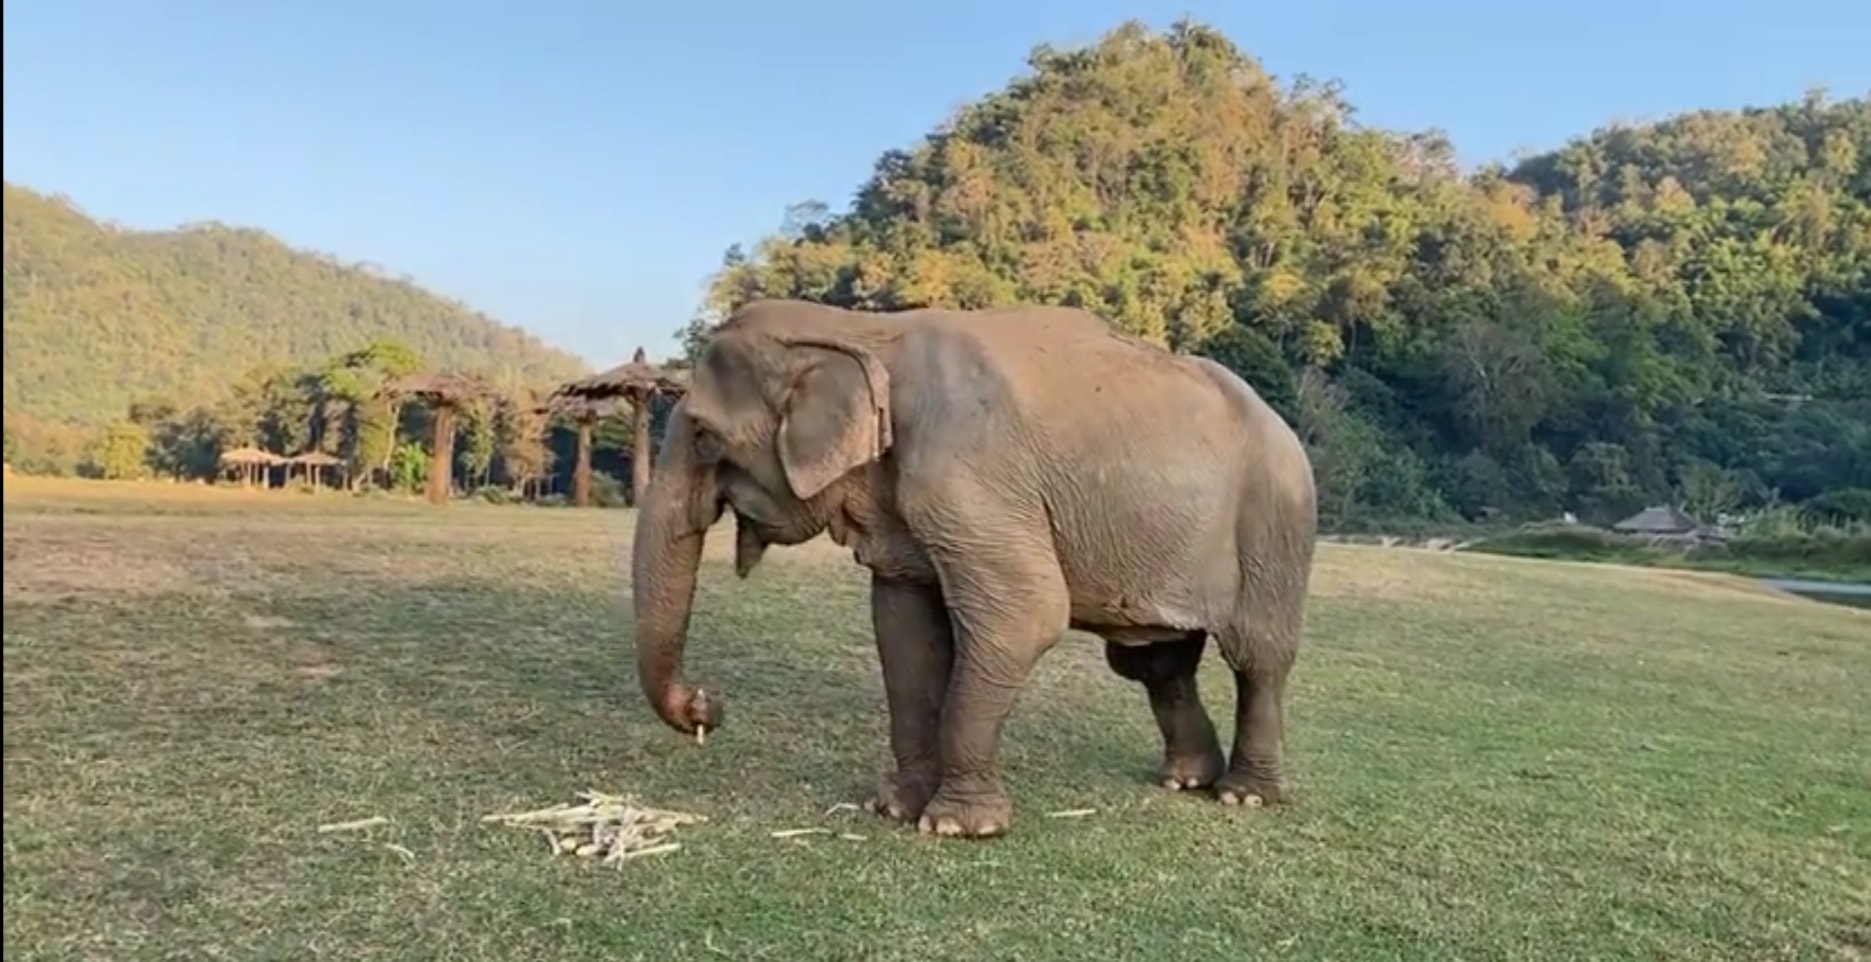 Update of Raya our recent rescued elephant.